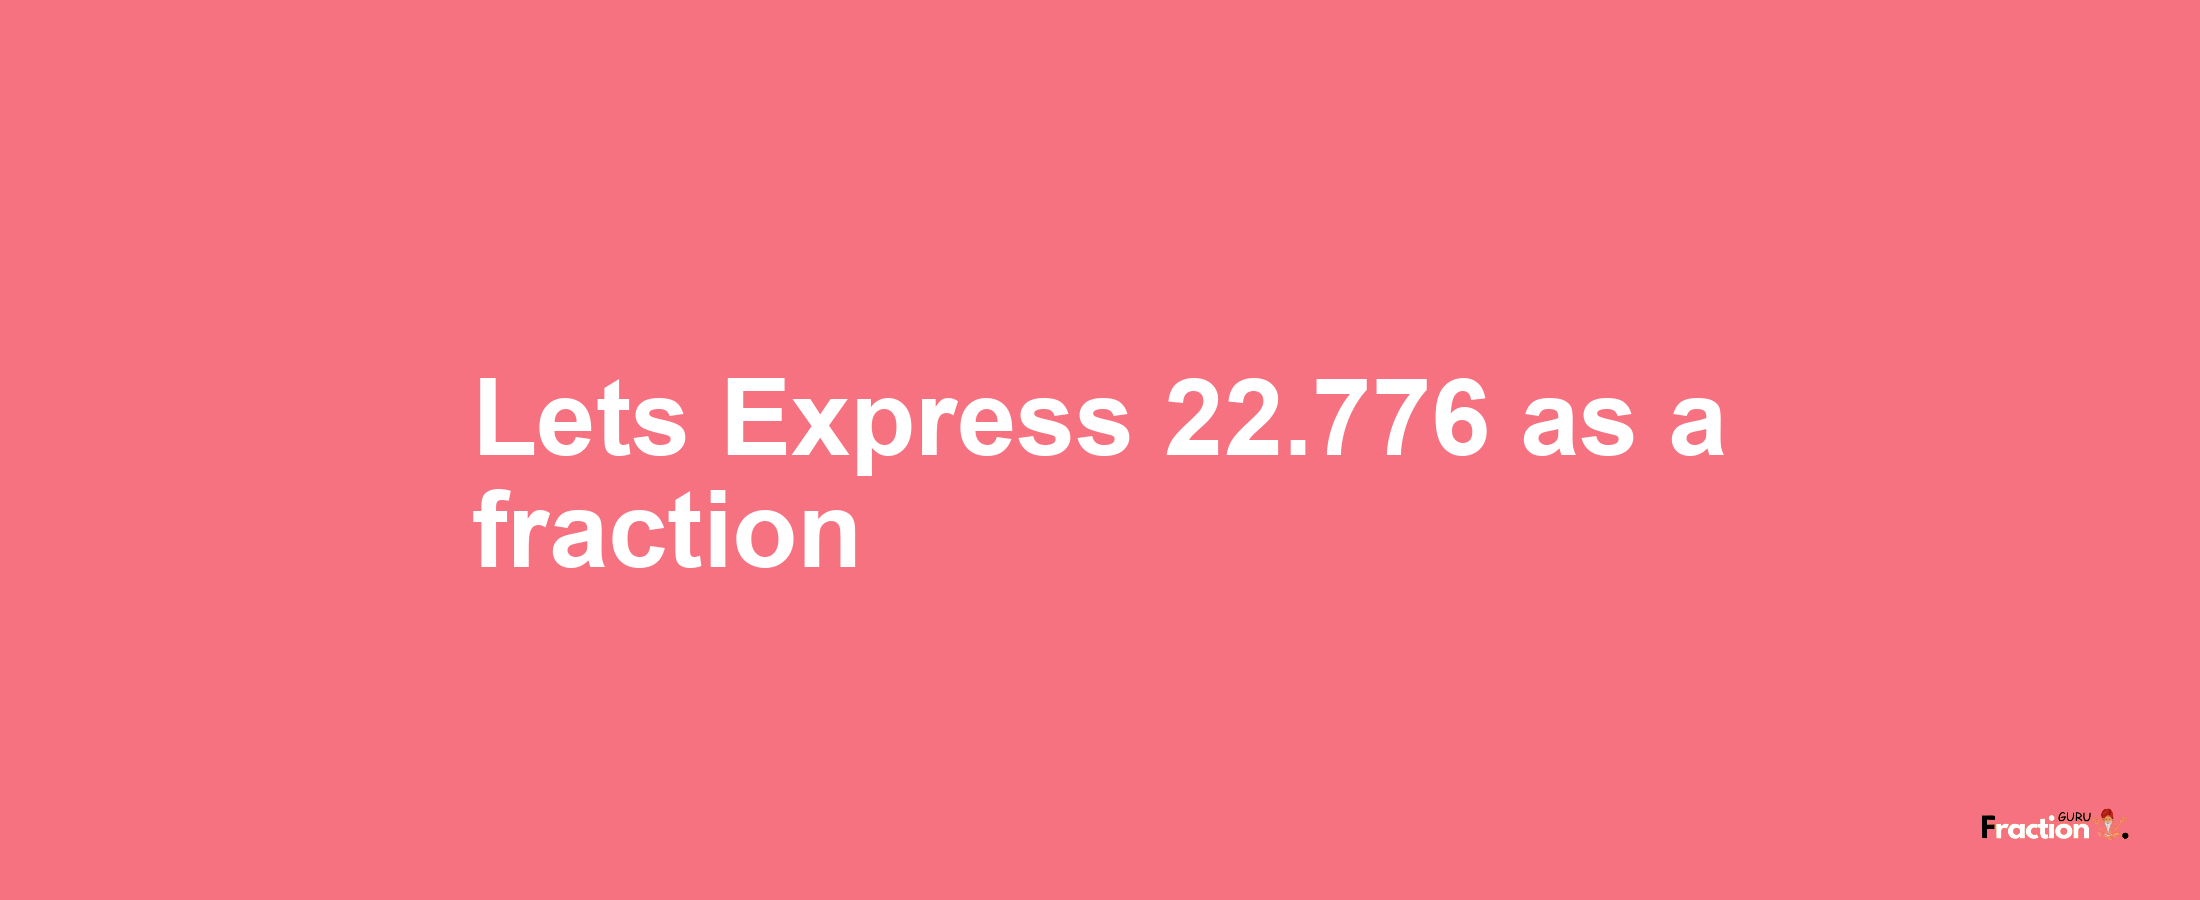 Lets Express 22.776 as afraction